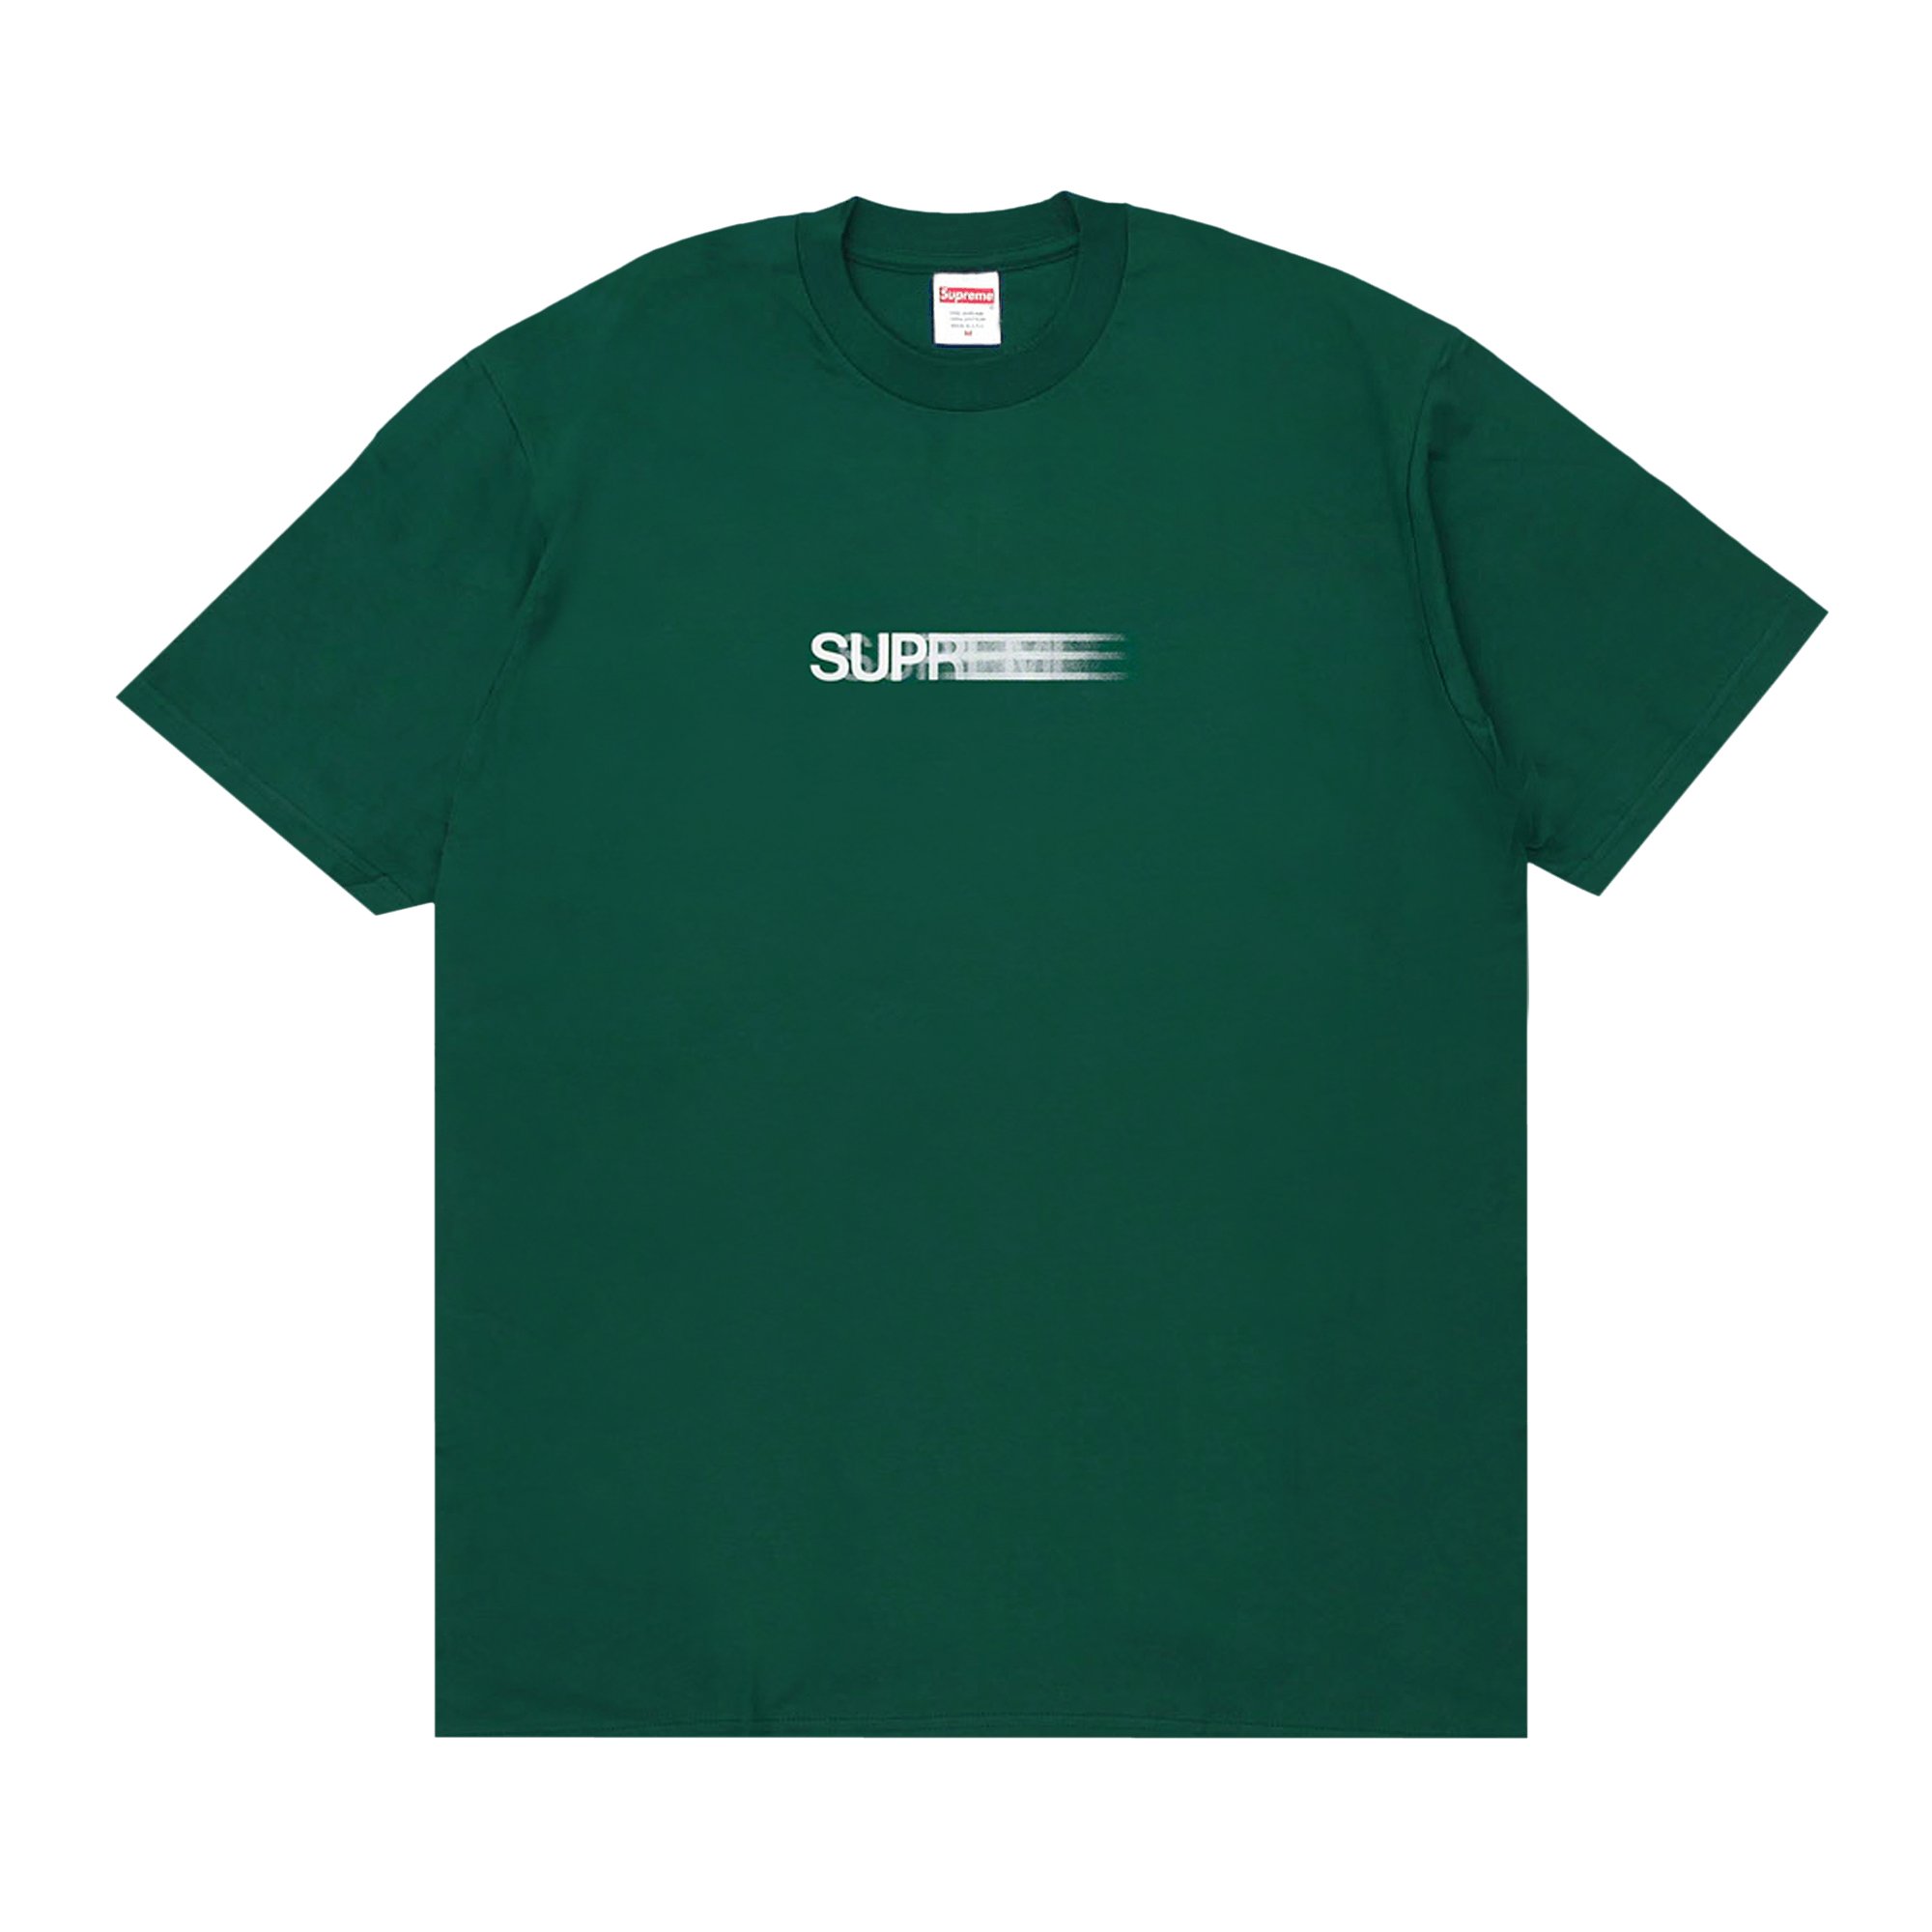 M Motion Logo Tee Green 緑　グリーン　モーションロゴ